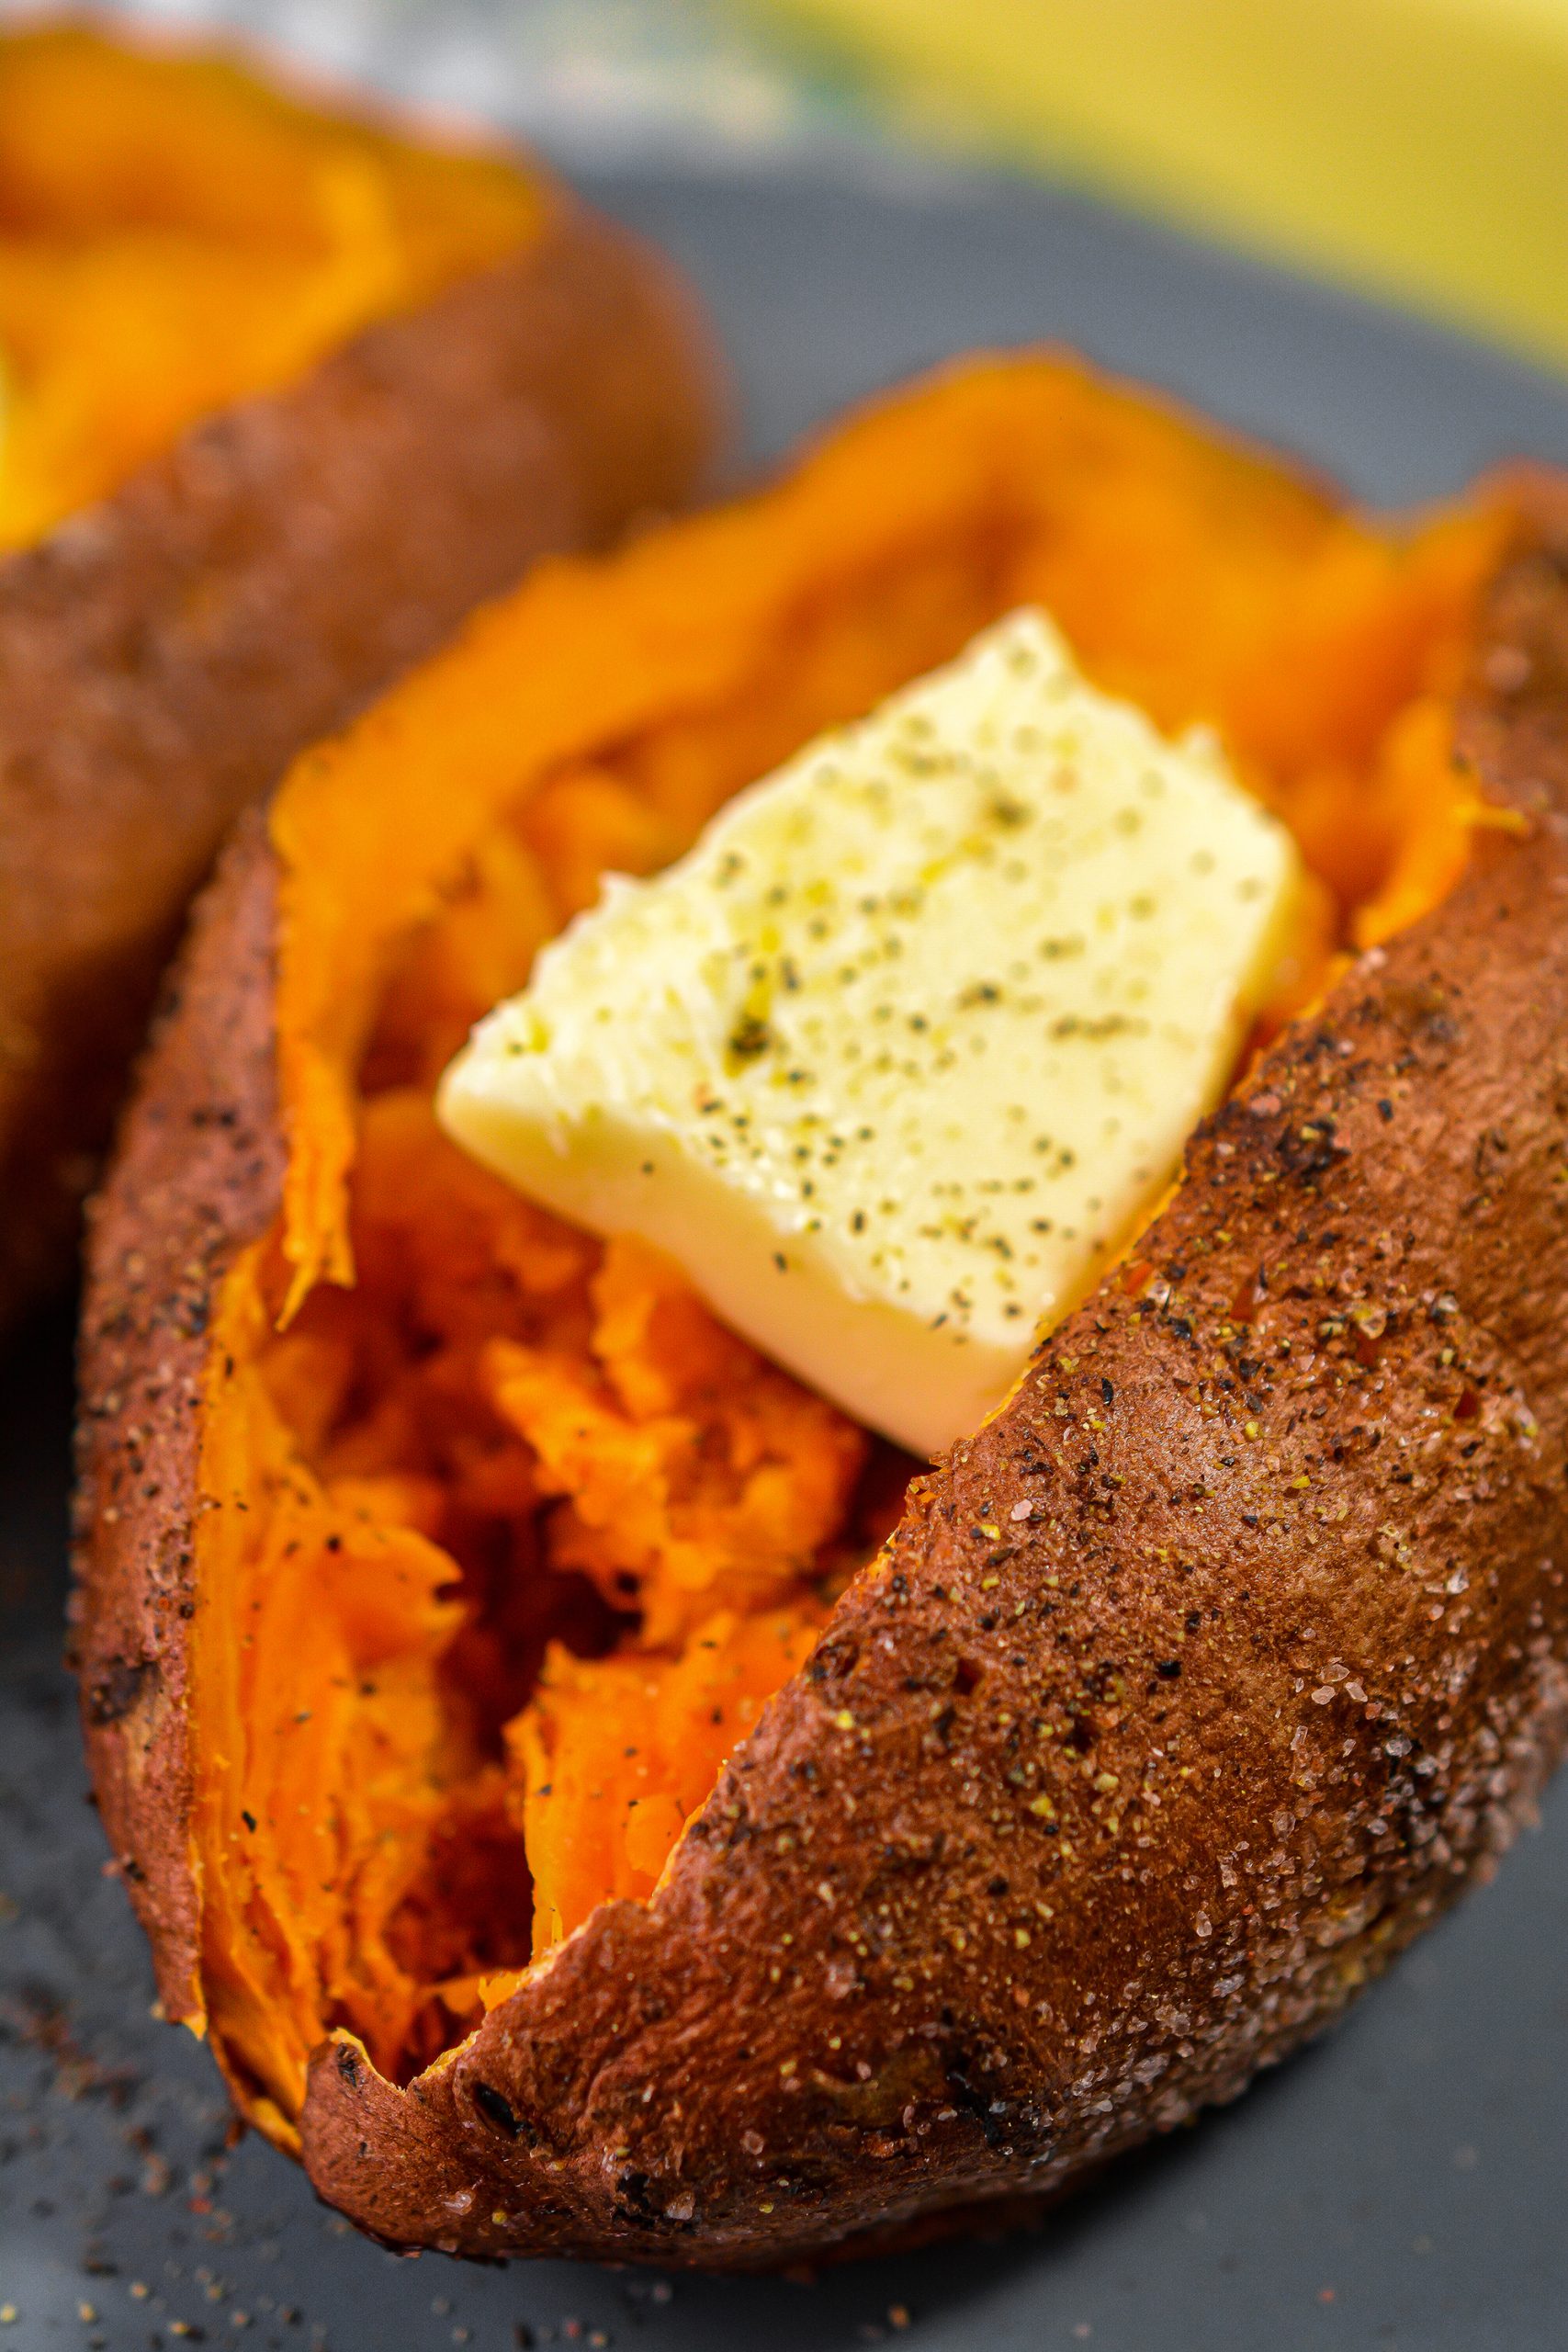 How to Make Sweet Potatoes in the Microwave